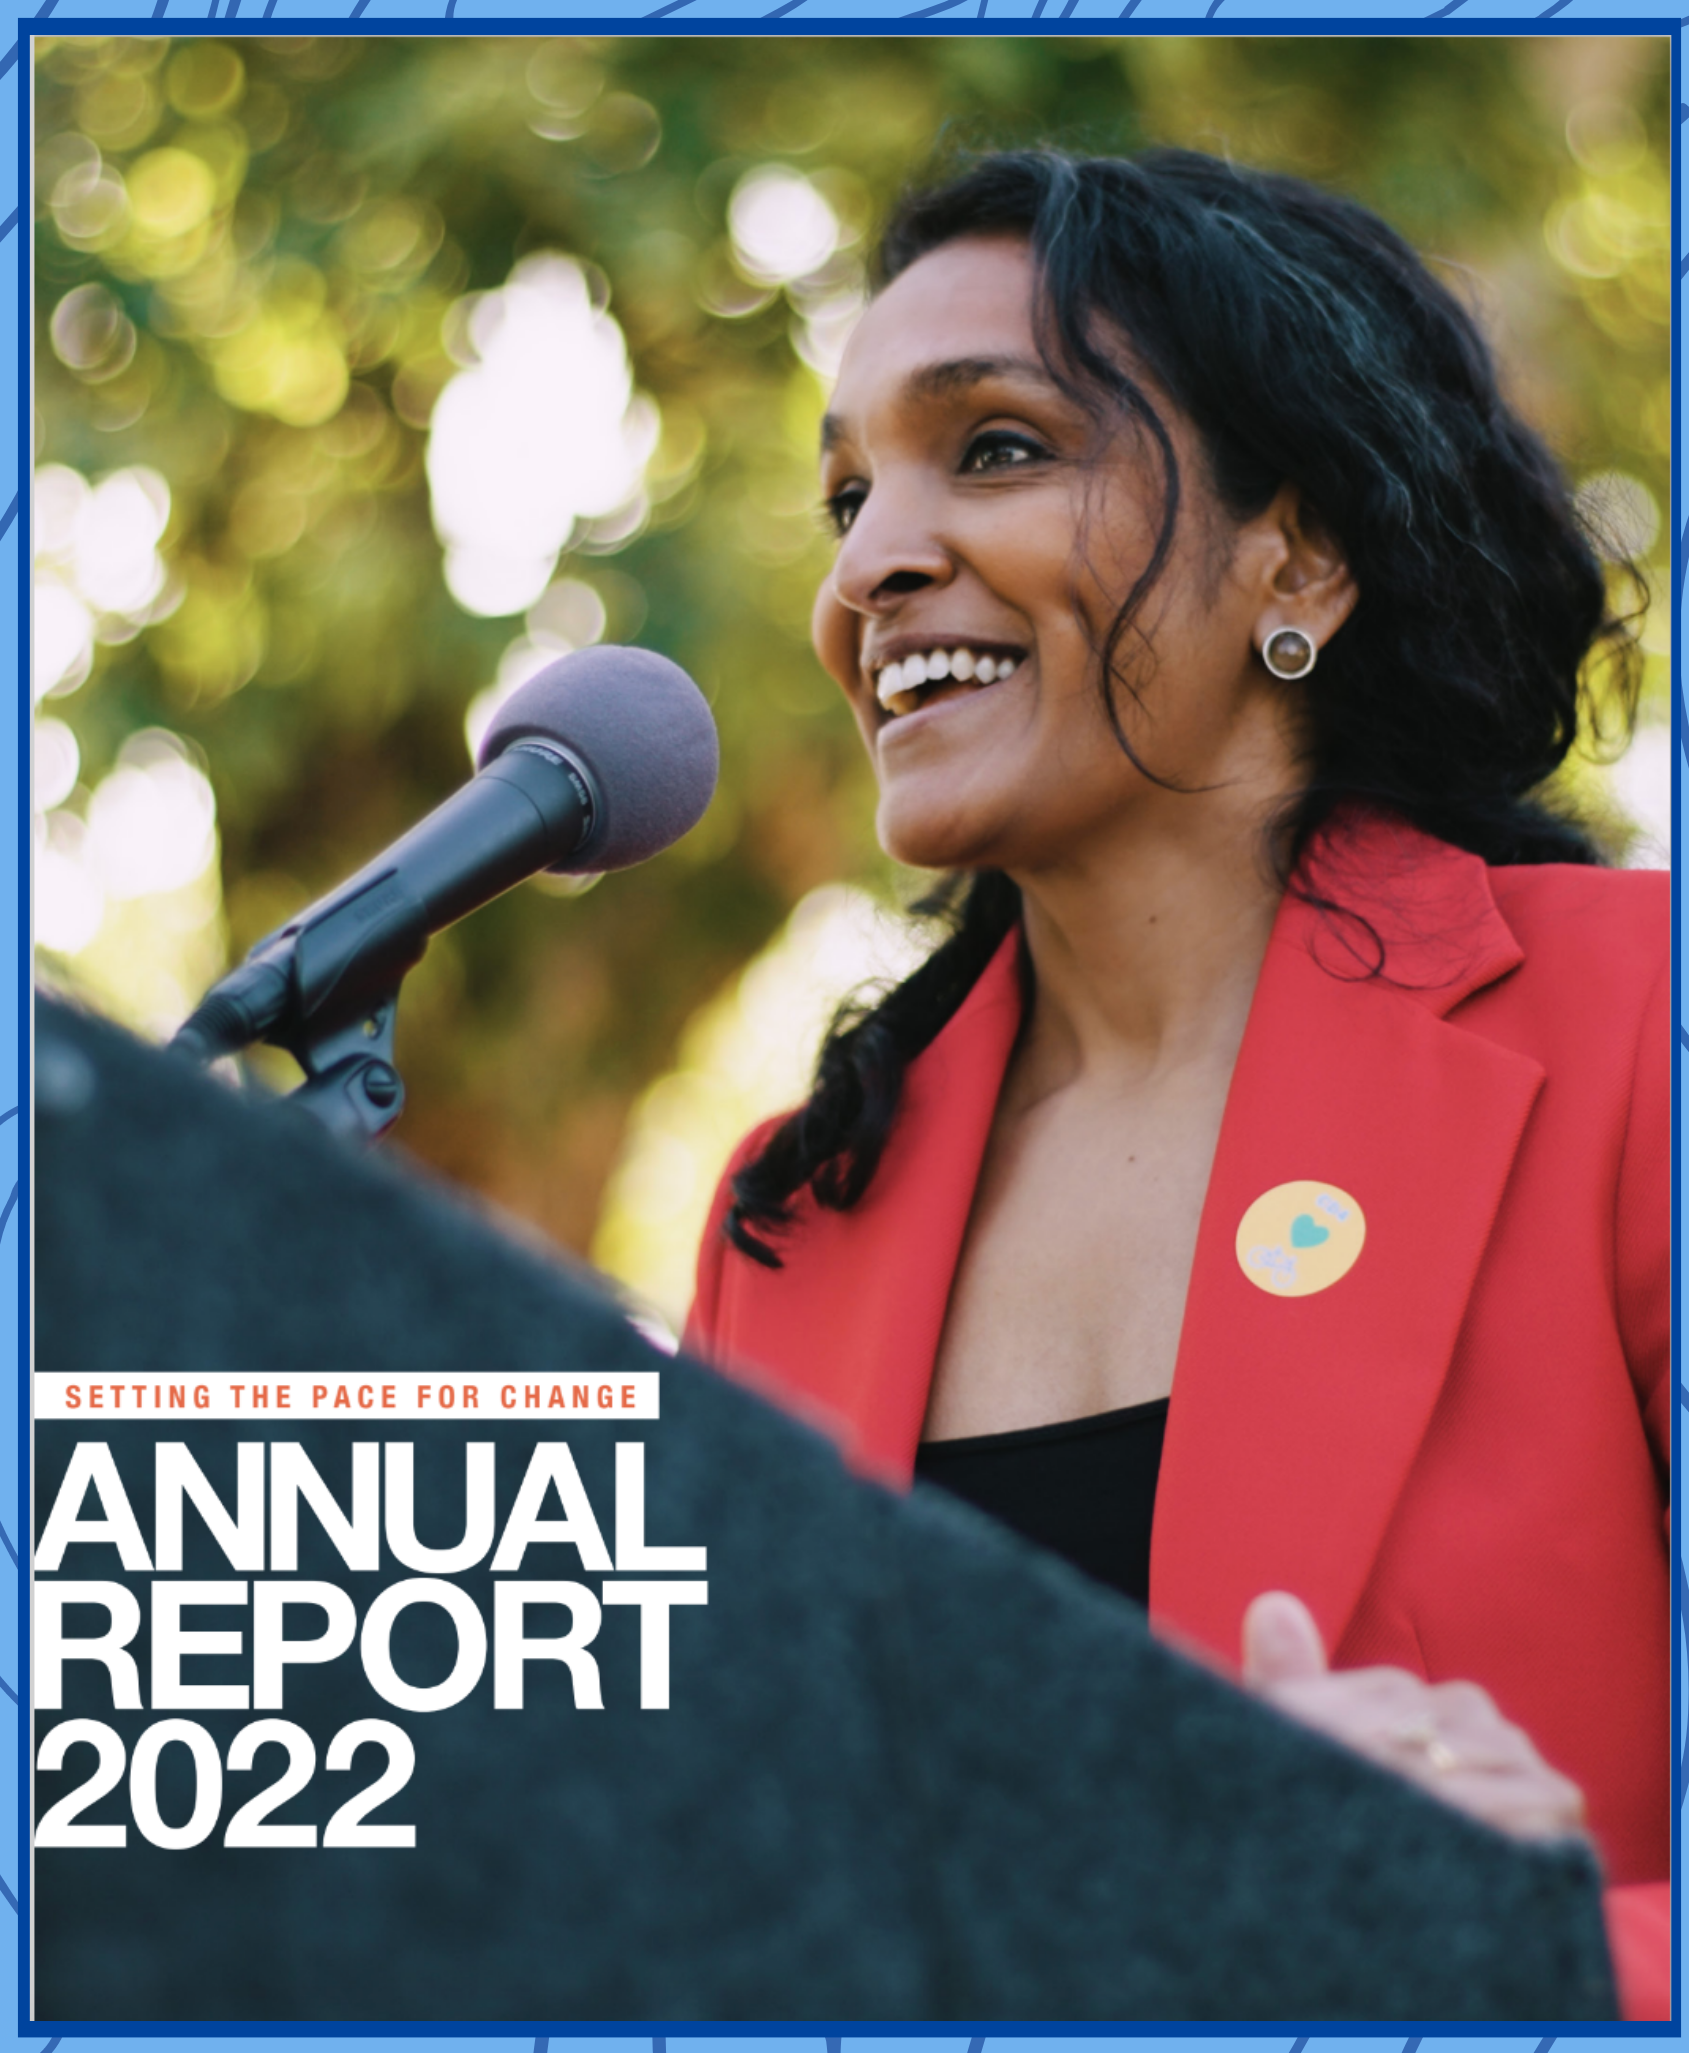 Image of CD4 annual report cover titled 